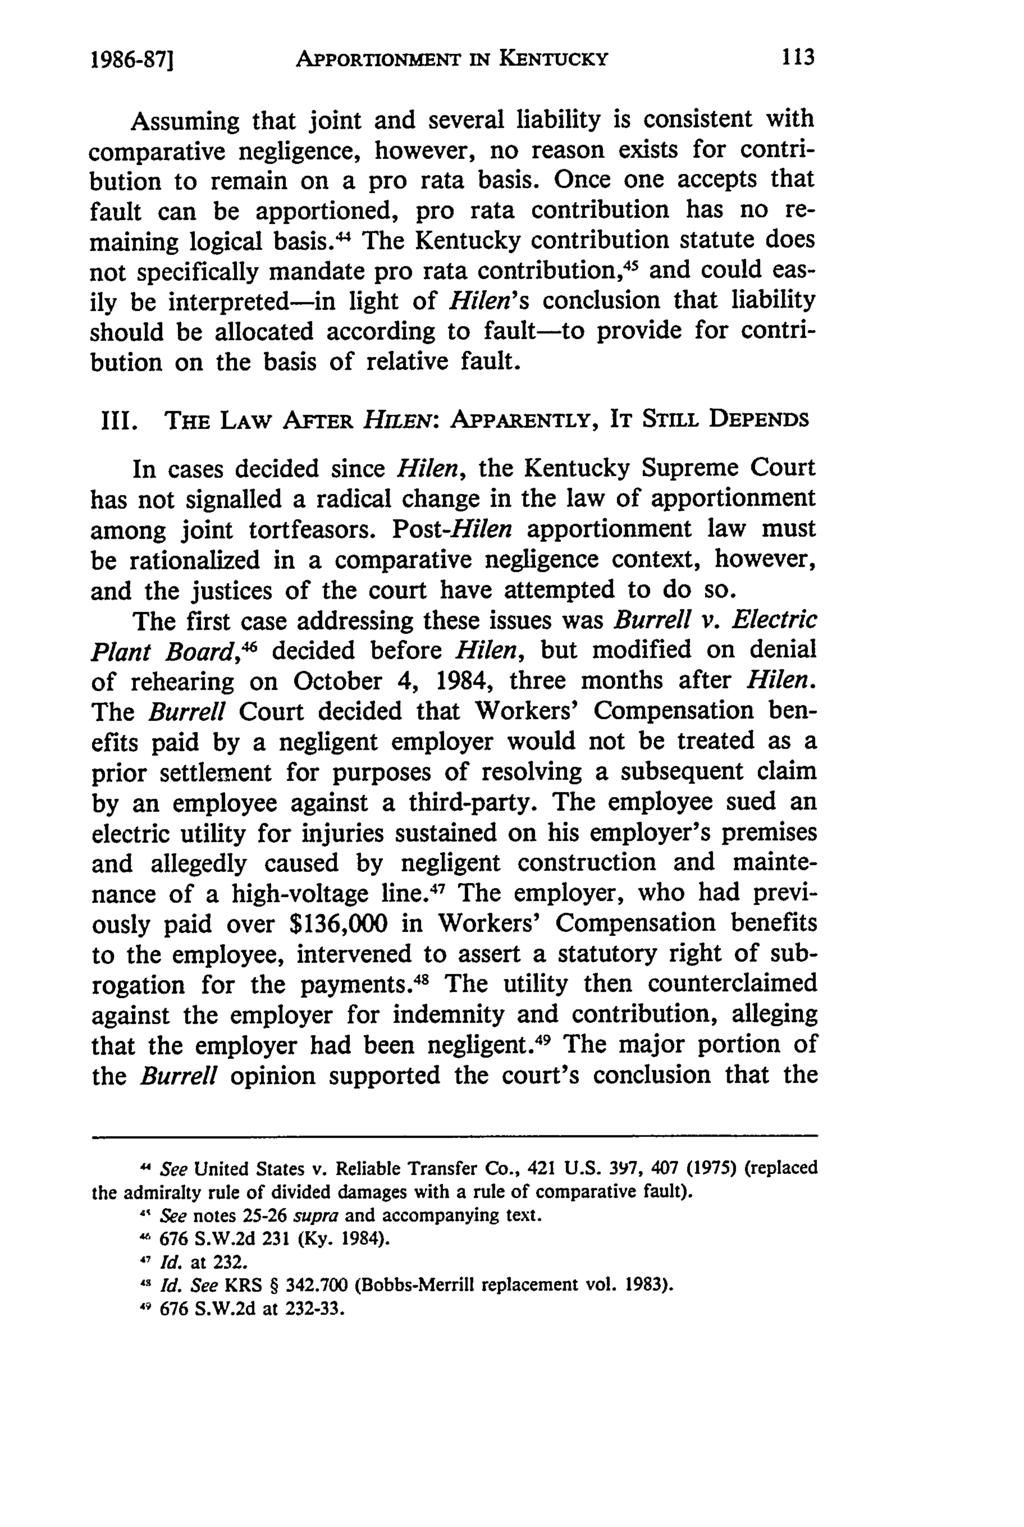 1986-87] APPORTIONMENT IN KENTUCKY Assuming that joint and several liability is consistent with comparative negligence, however, no reason exists for contribution to remain on a pro rata basis.